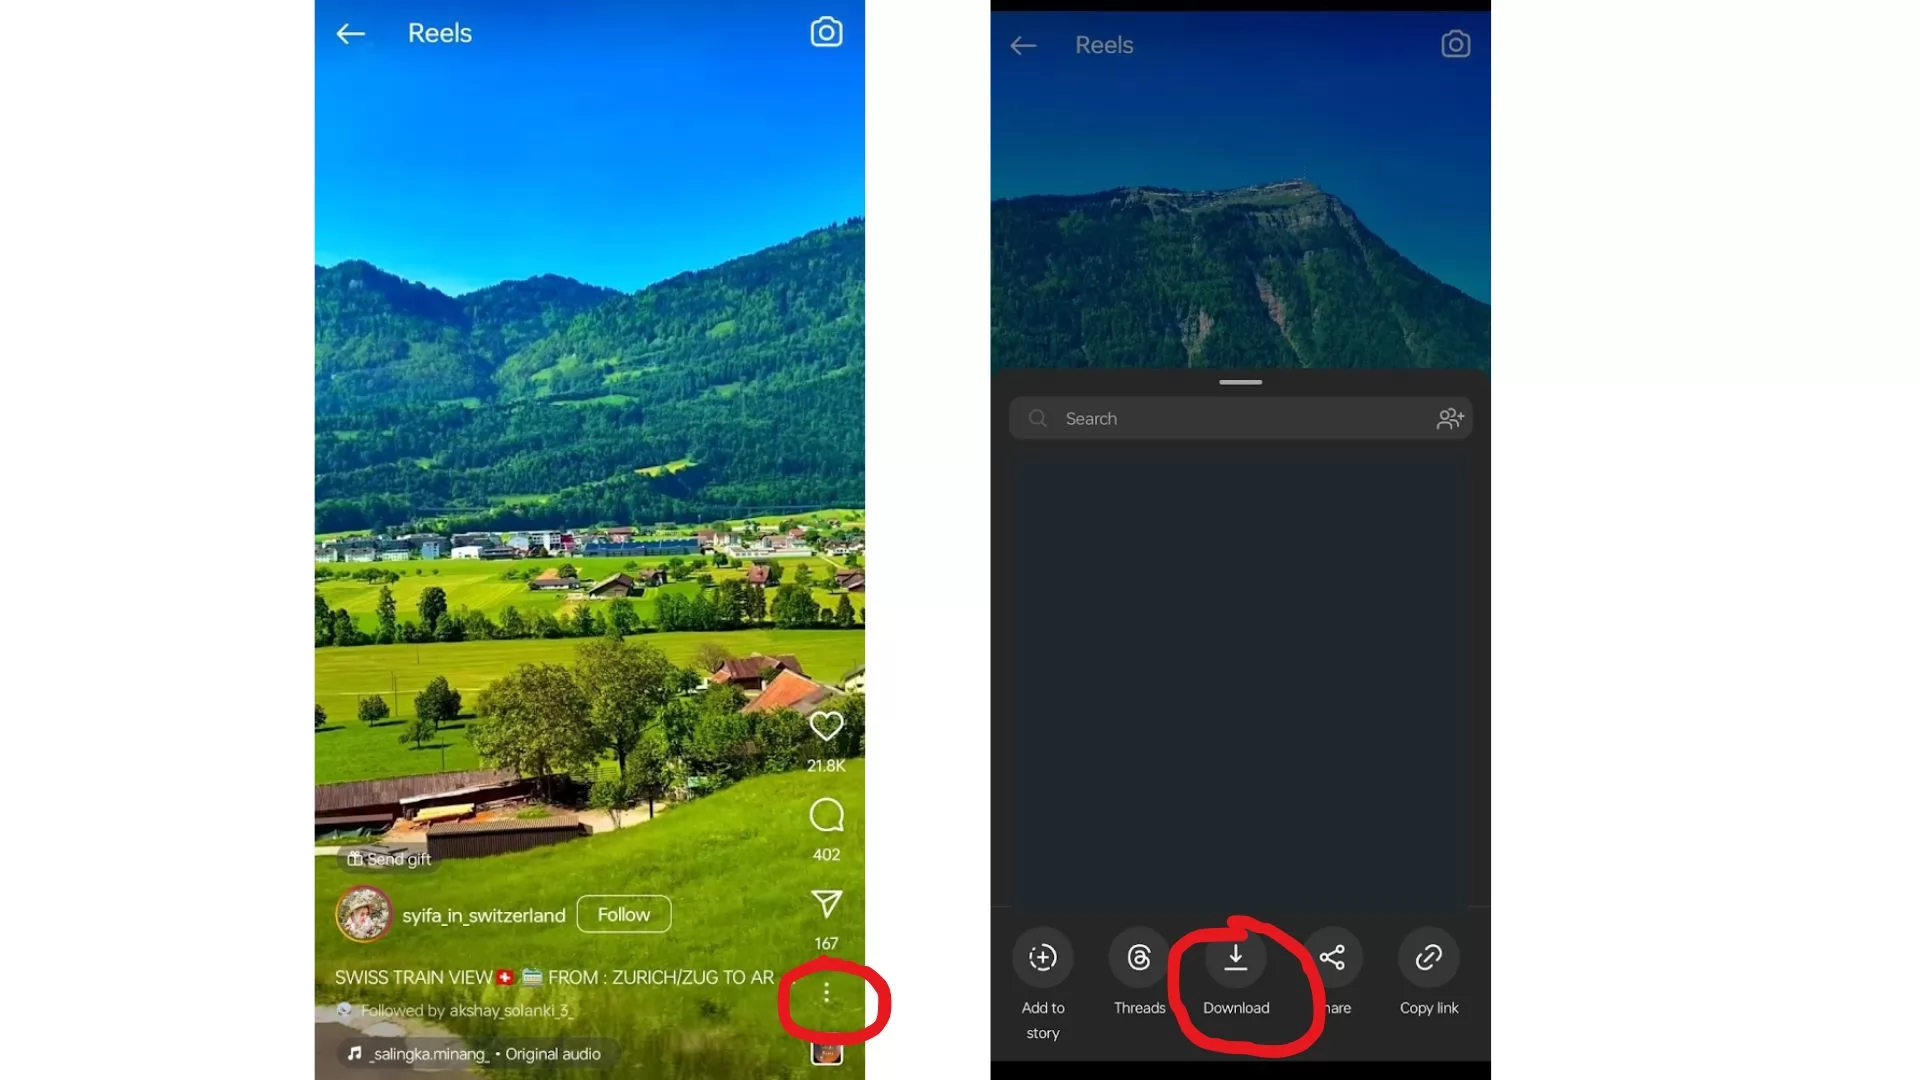 How to Download Instagram Videos from the App?